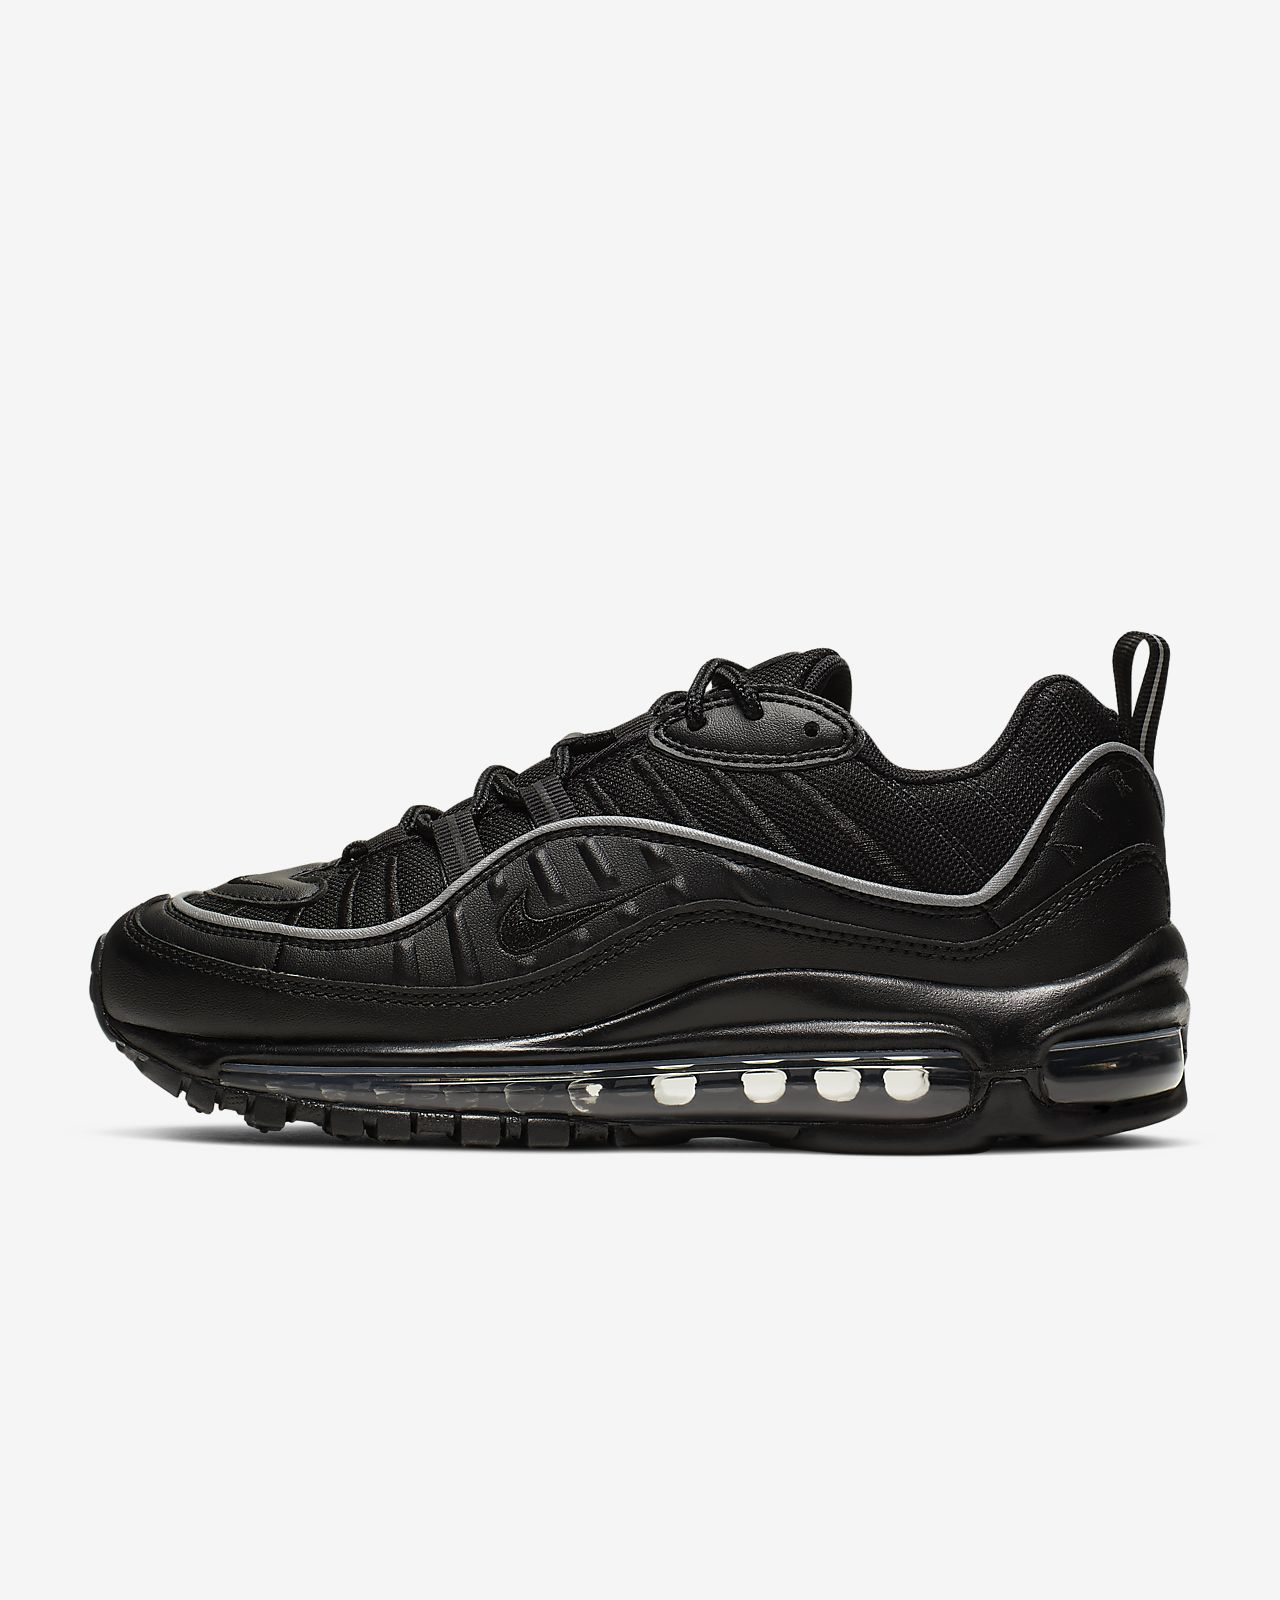 nike air 98 Cheaper Than Retail Price> Buy Clothing, Accessories ...